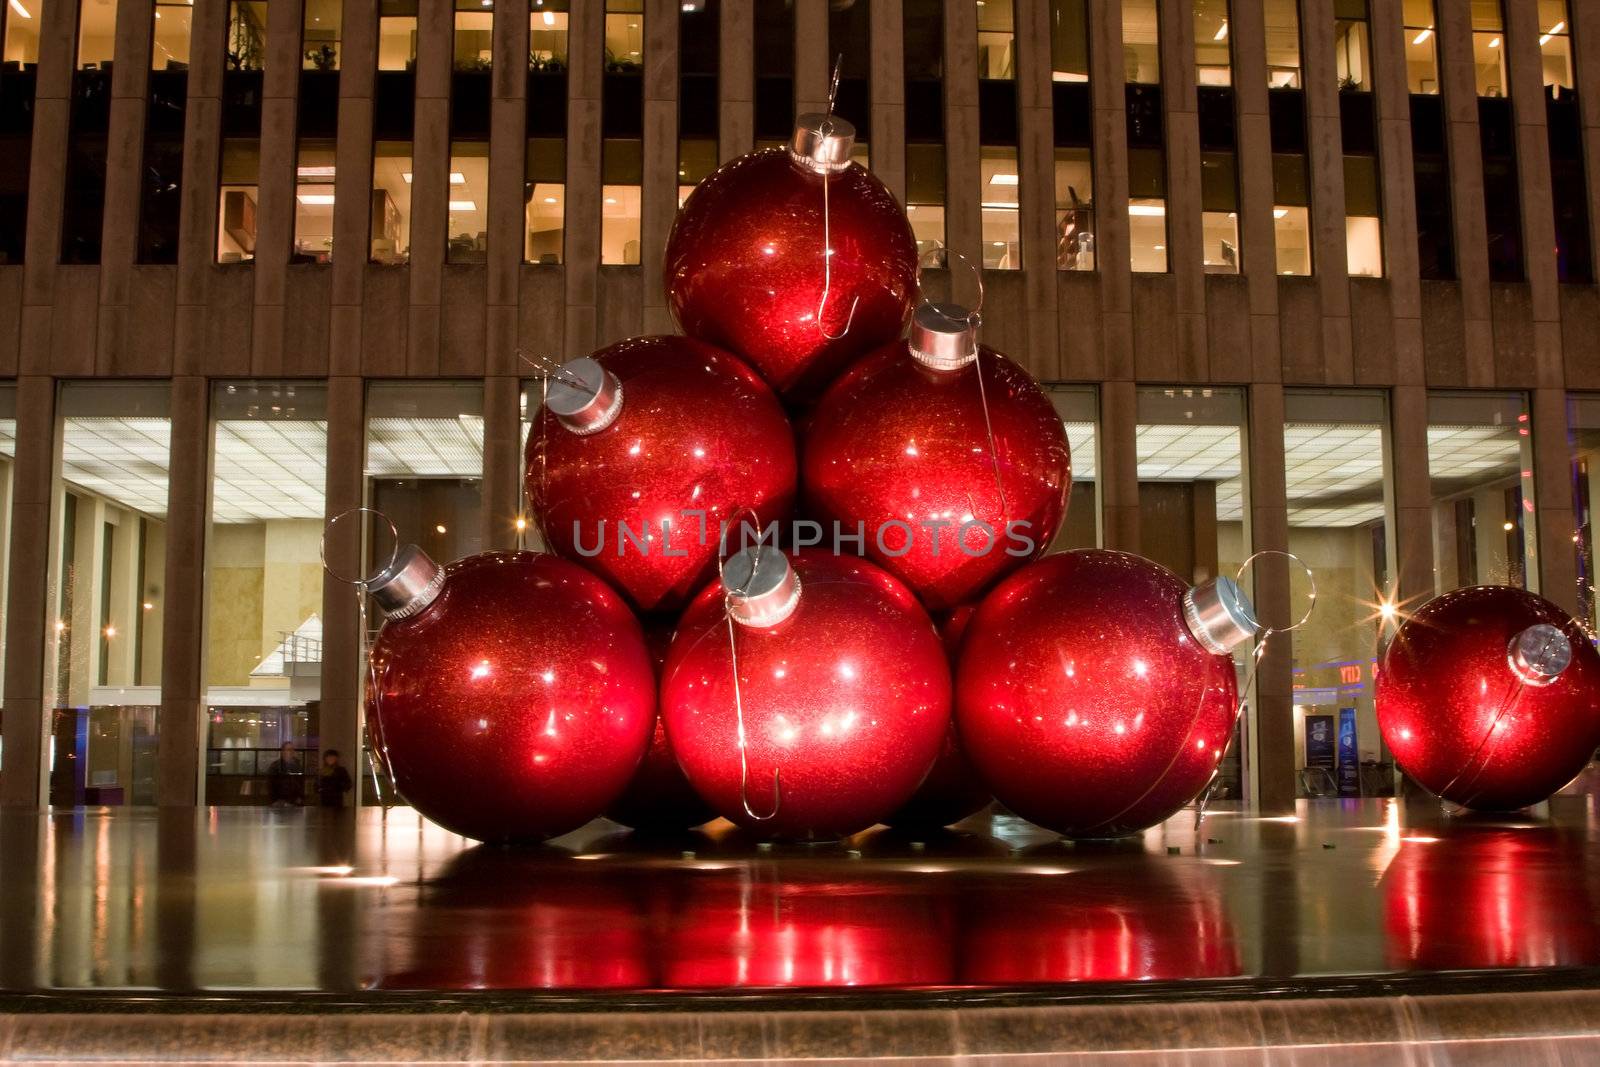 Big red balls as ornaments for the Christmas tree as an art exhibit on 6th Avenue in New York City